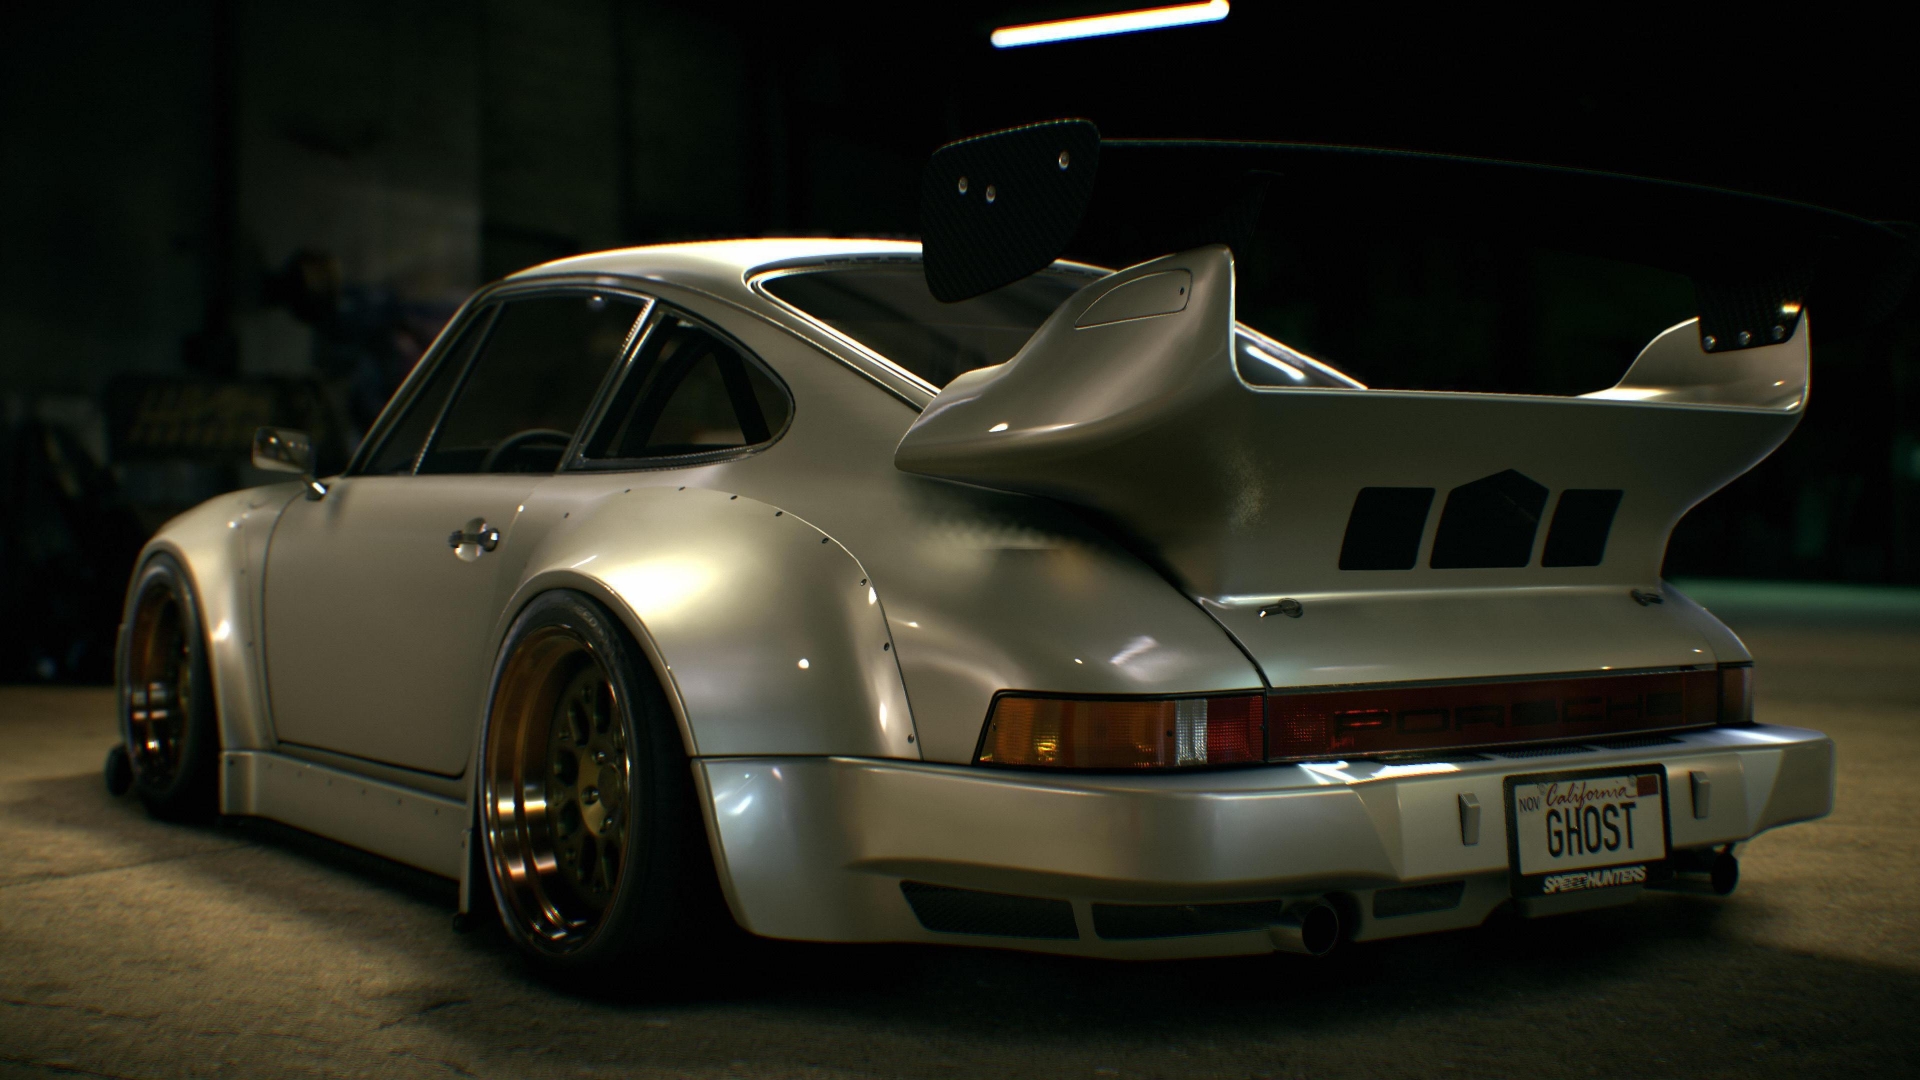 Need For Speed Hunters for 1920 x 1080 HDTV 1080p resolution